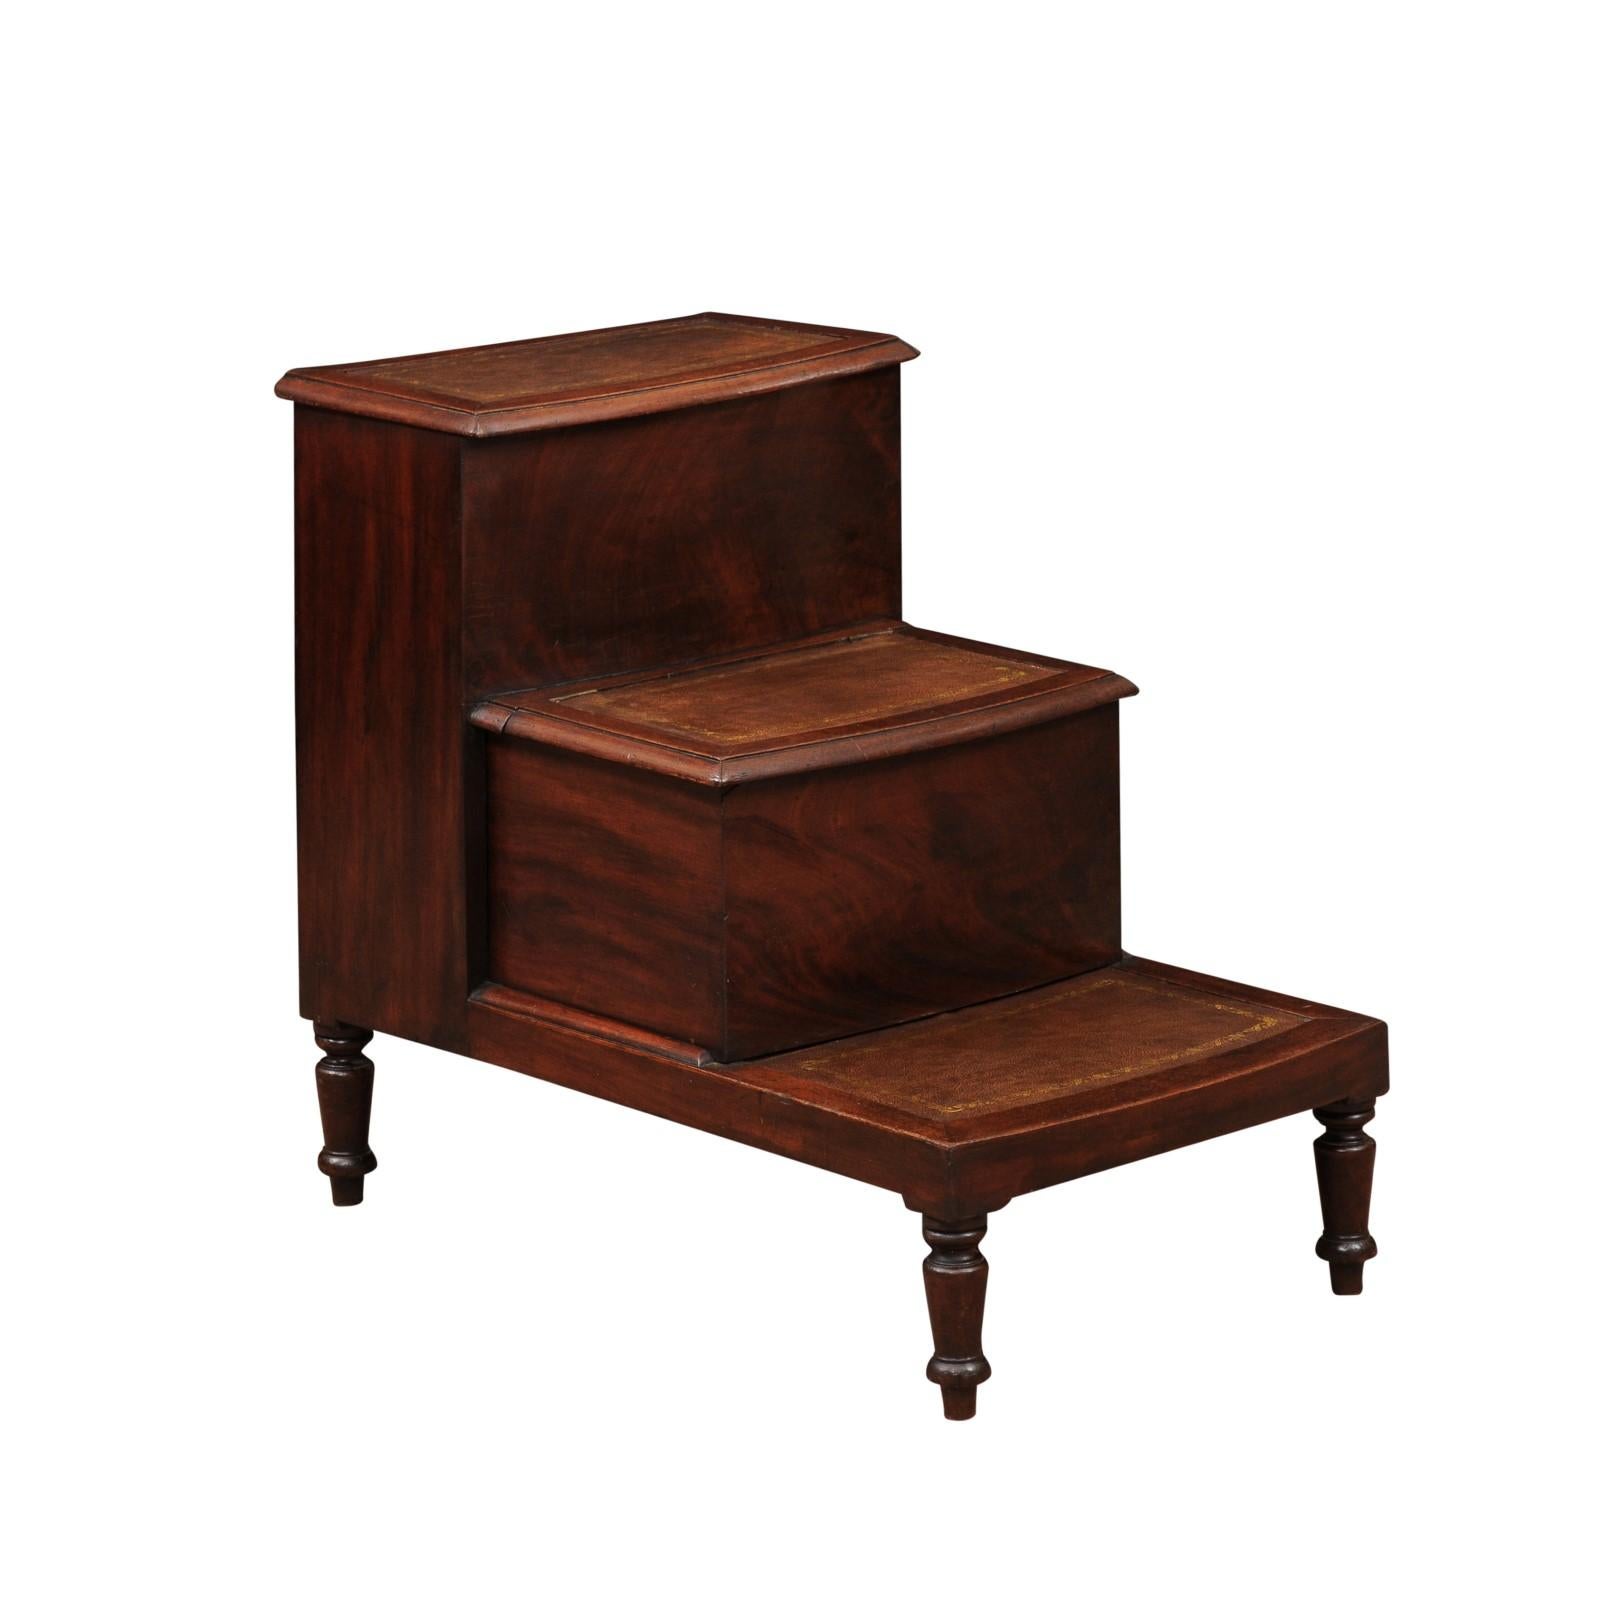  19th Century English Regency Library Steps in Mahogany with Embossed Leather For Sale 4